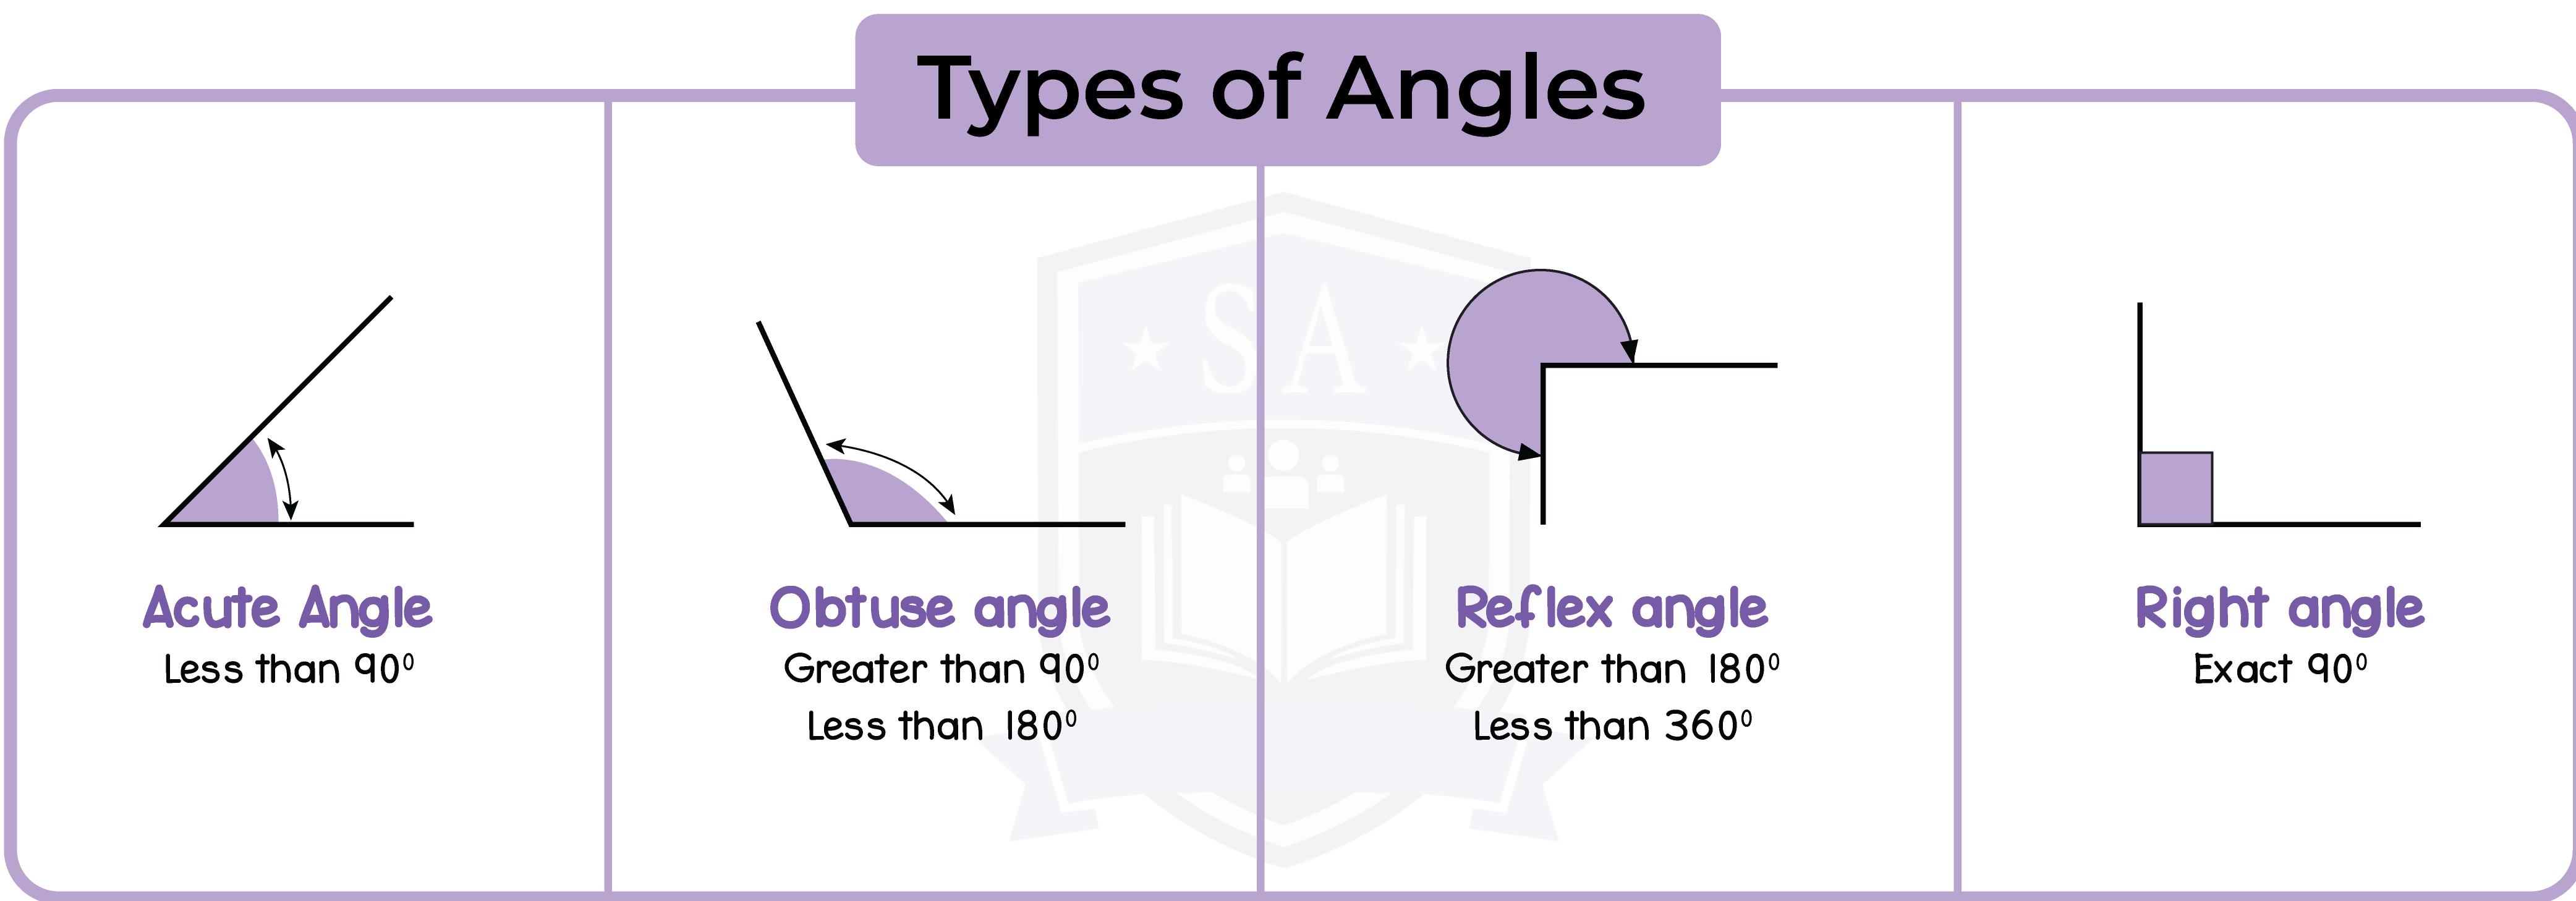 edexcel_igcse_mathematics a_topic 25_angles, lines and triangles_001_Types of Angles